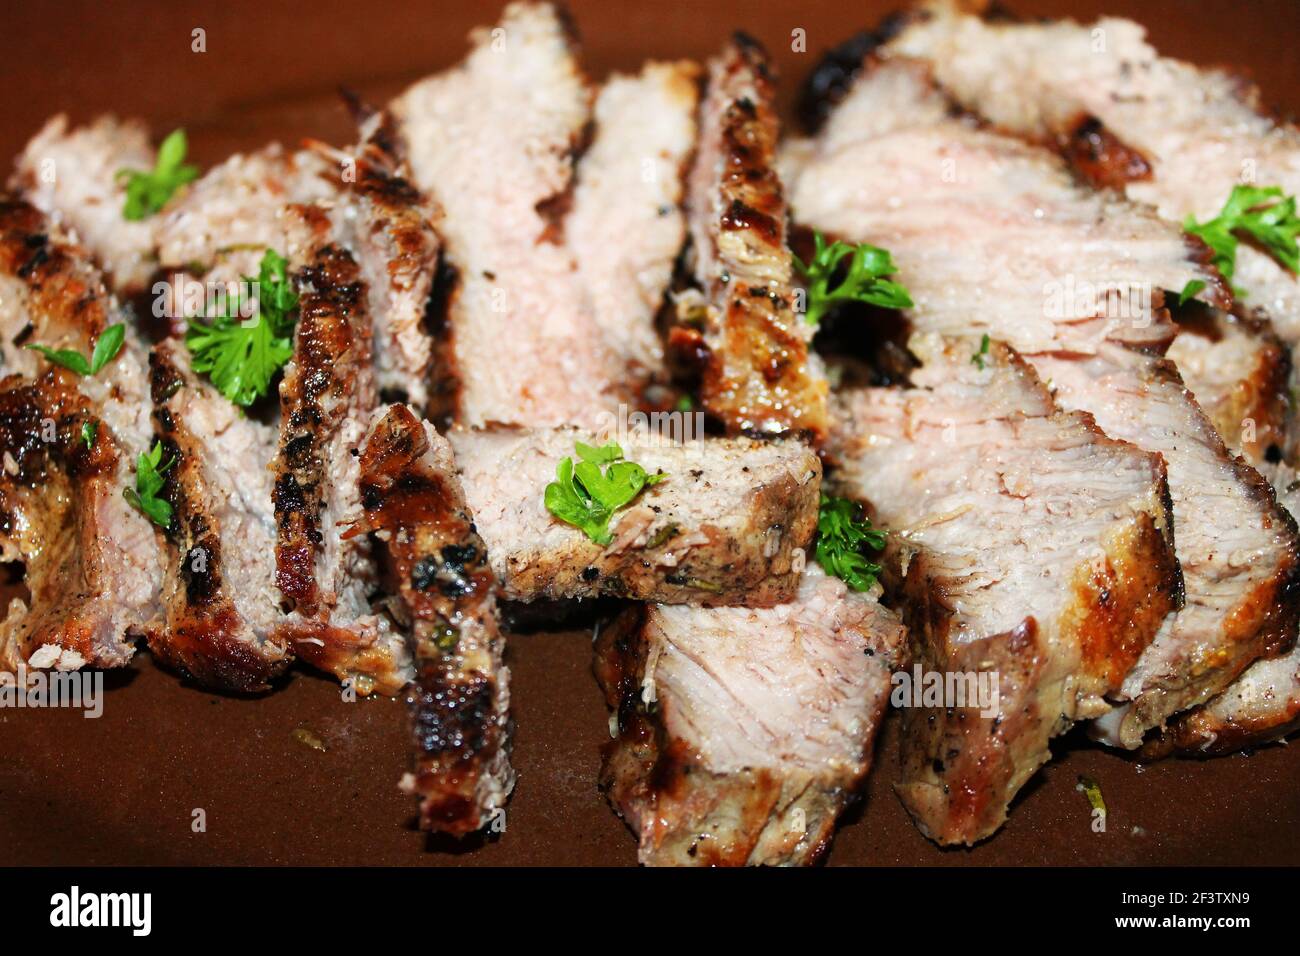 Close-up of sliced baked pork on a serving plate. Stock Photo